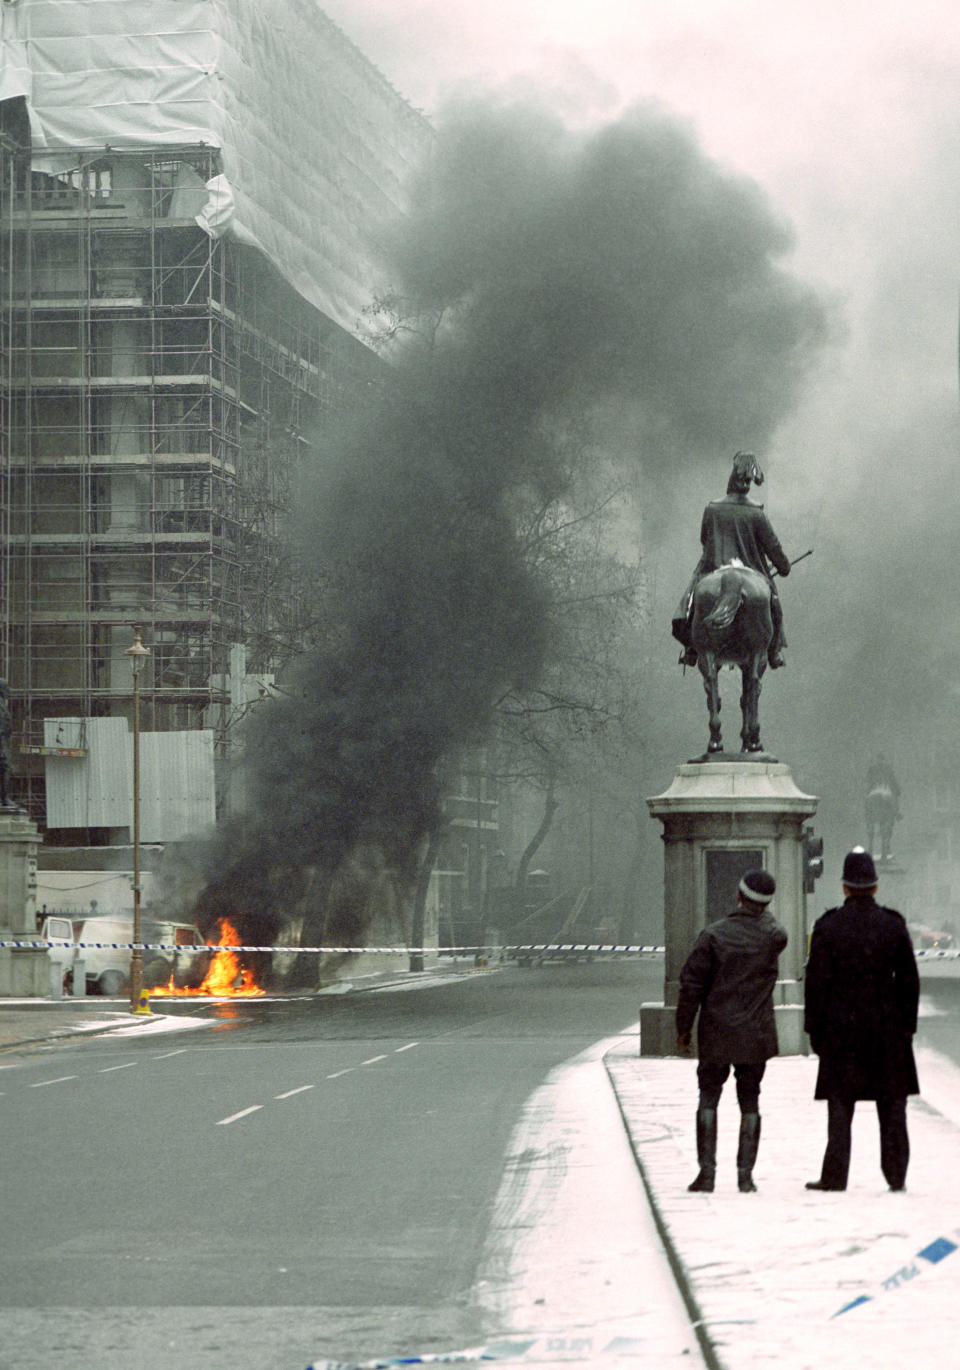 A white van burns outside the Banqueting House in Whitehall after an attempted mortar bomb attack on Downing Street.   (Photo by PA Images via Getty Images)